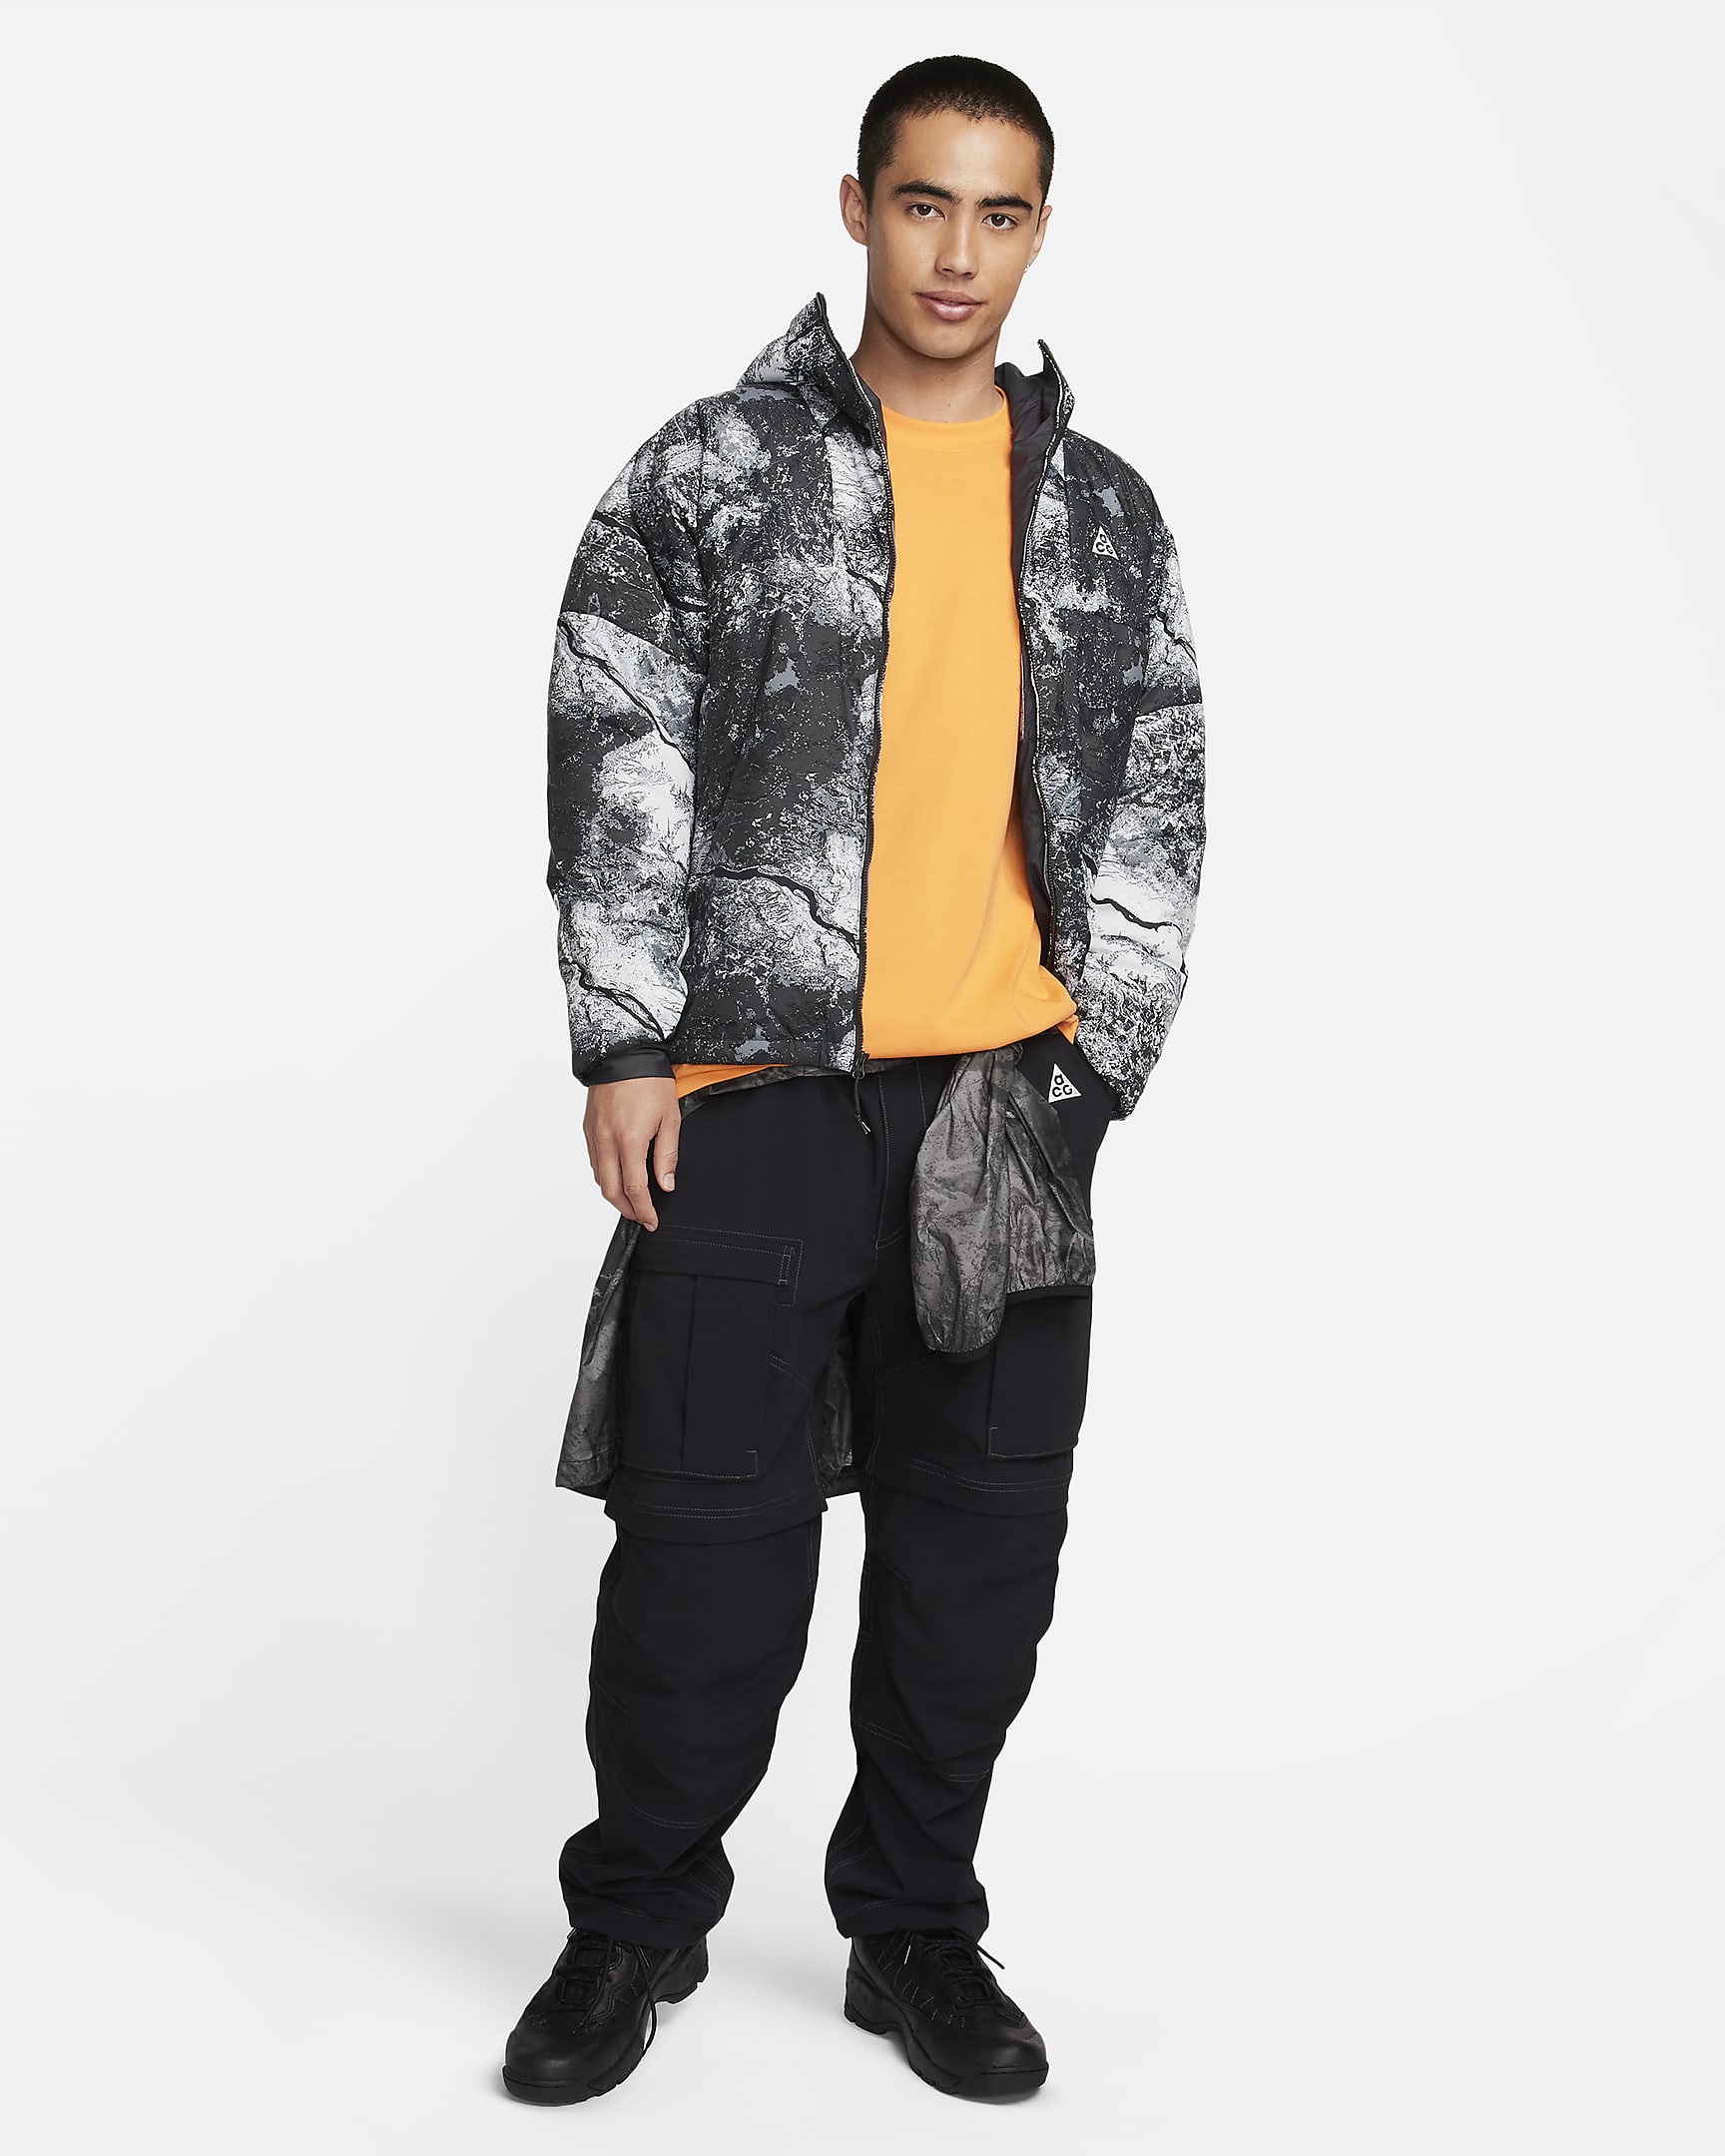 Nike ACG 'Rope de Dope' Men's Therma-FIT ADV All-Over Print Jacket. Nike SG